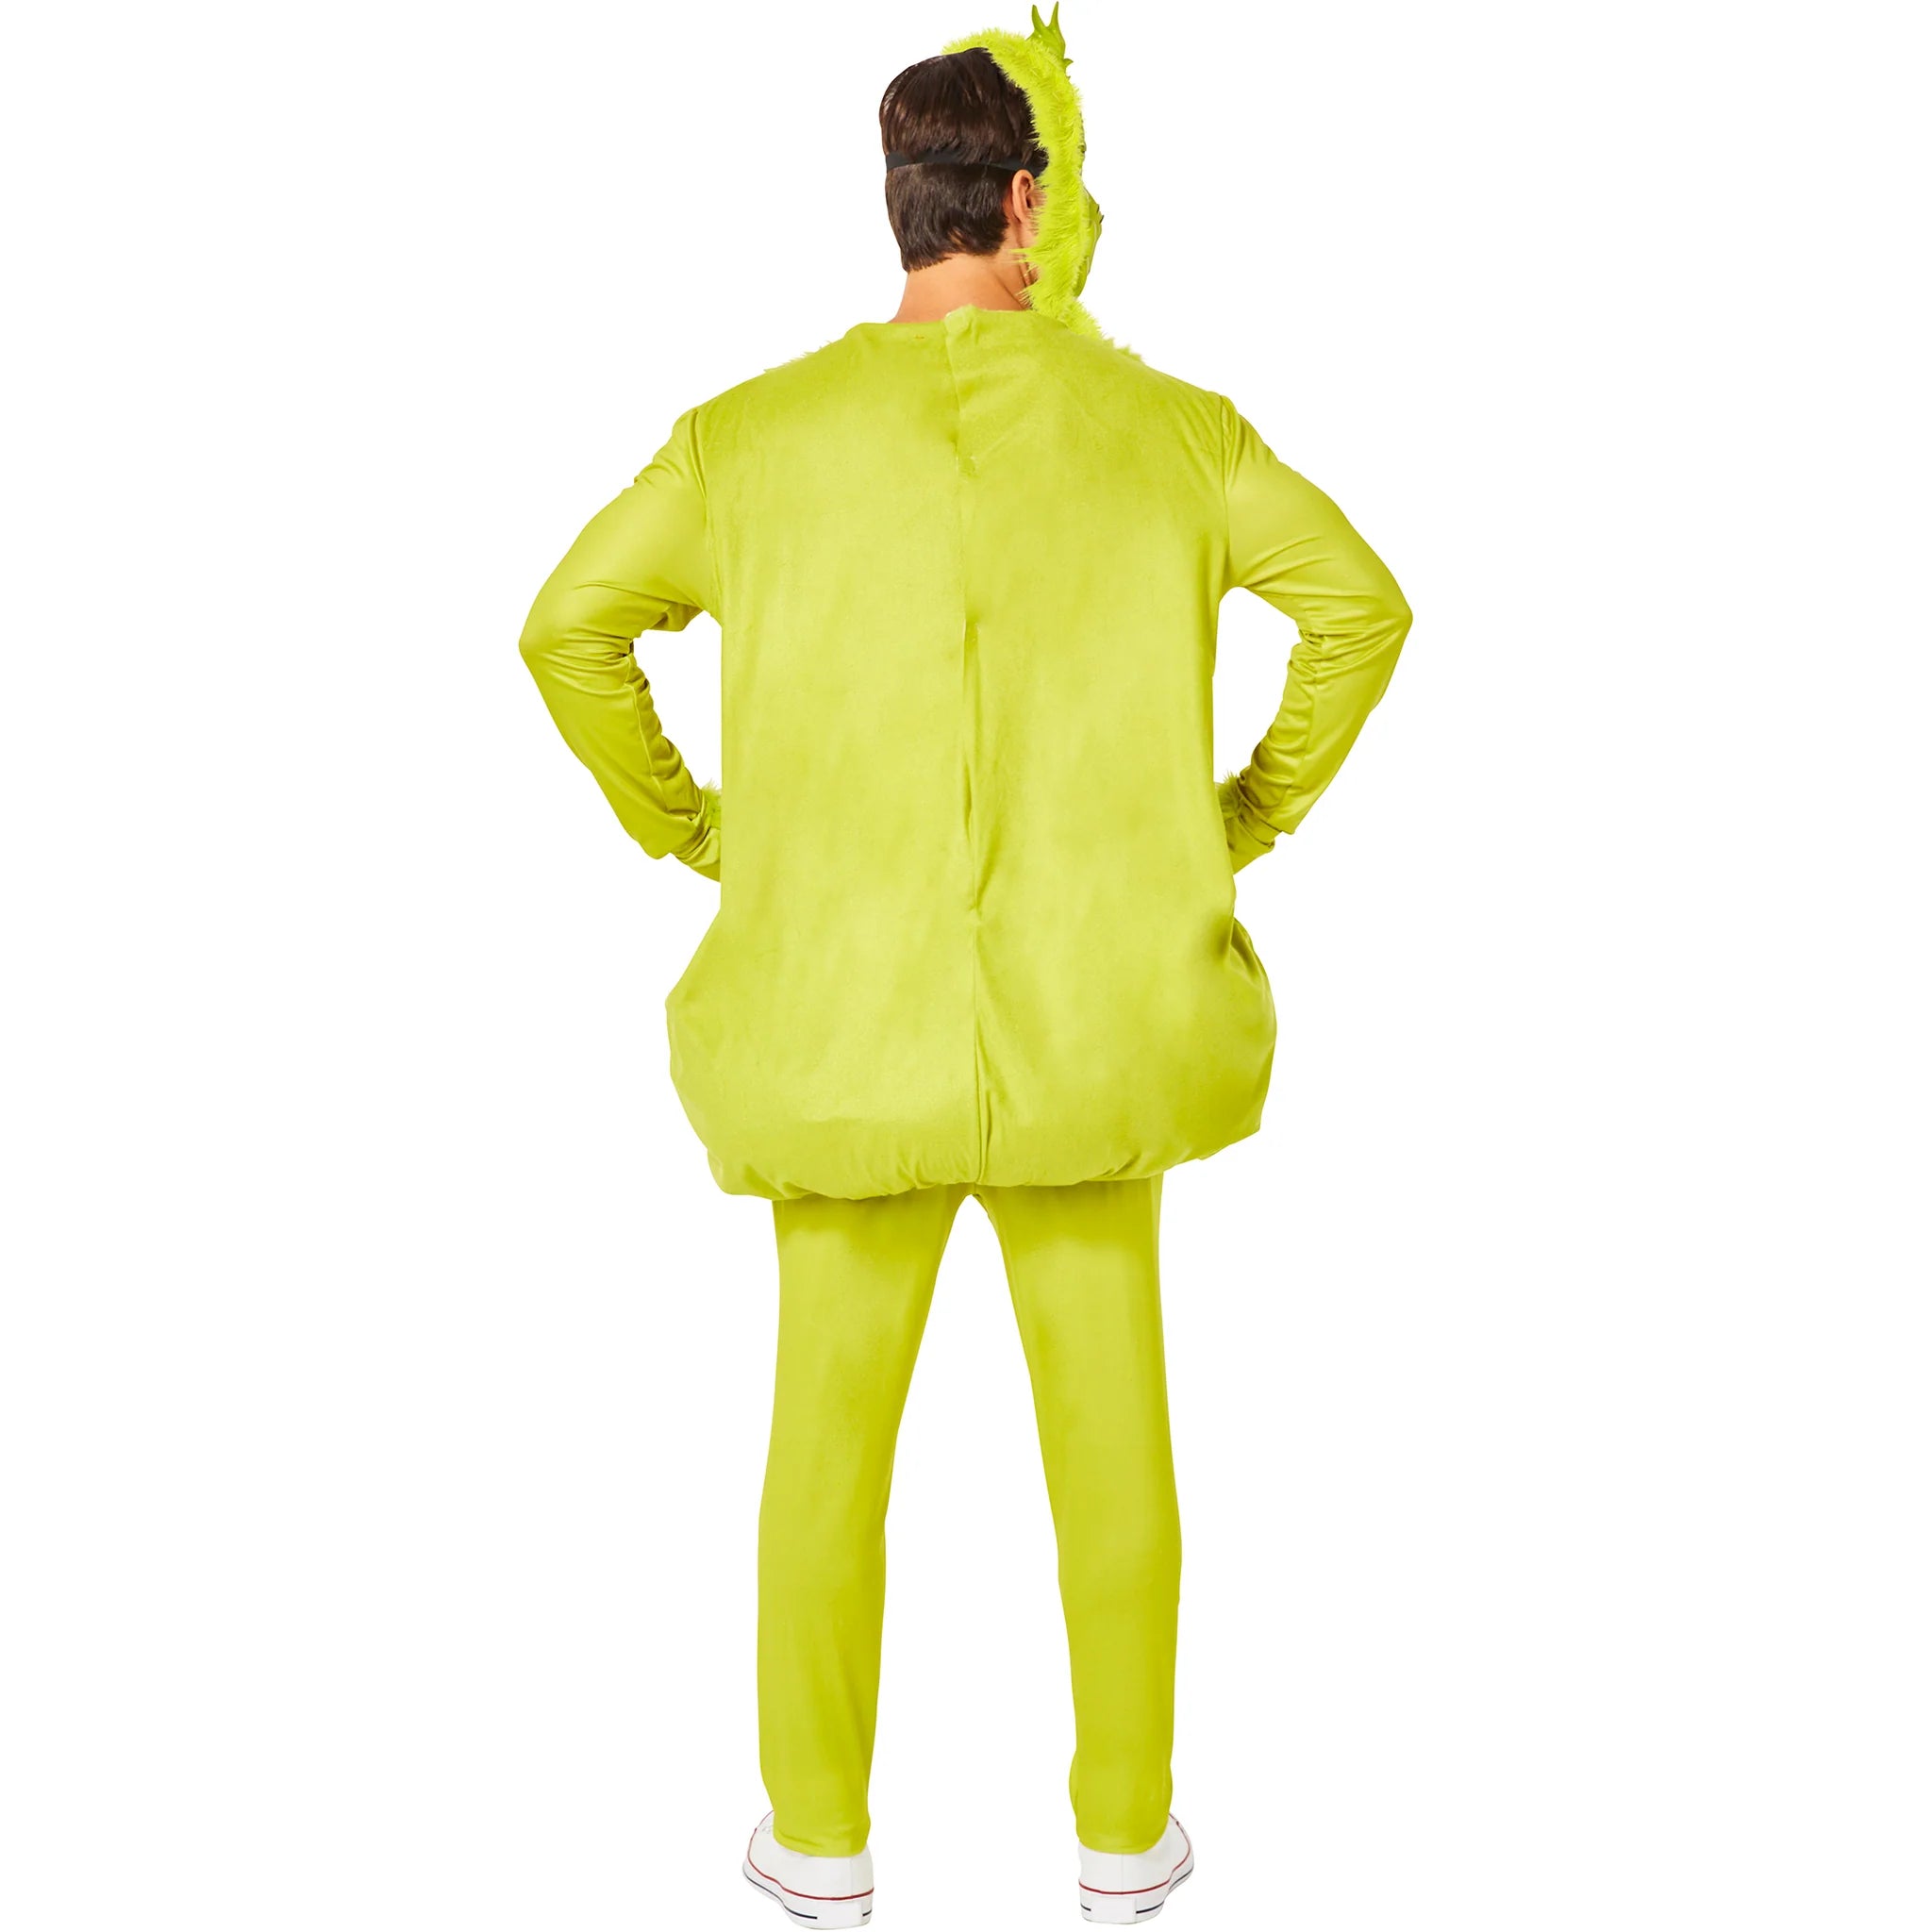 Dr. Suess The Grinch Costume